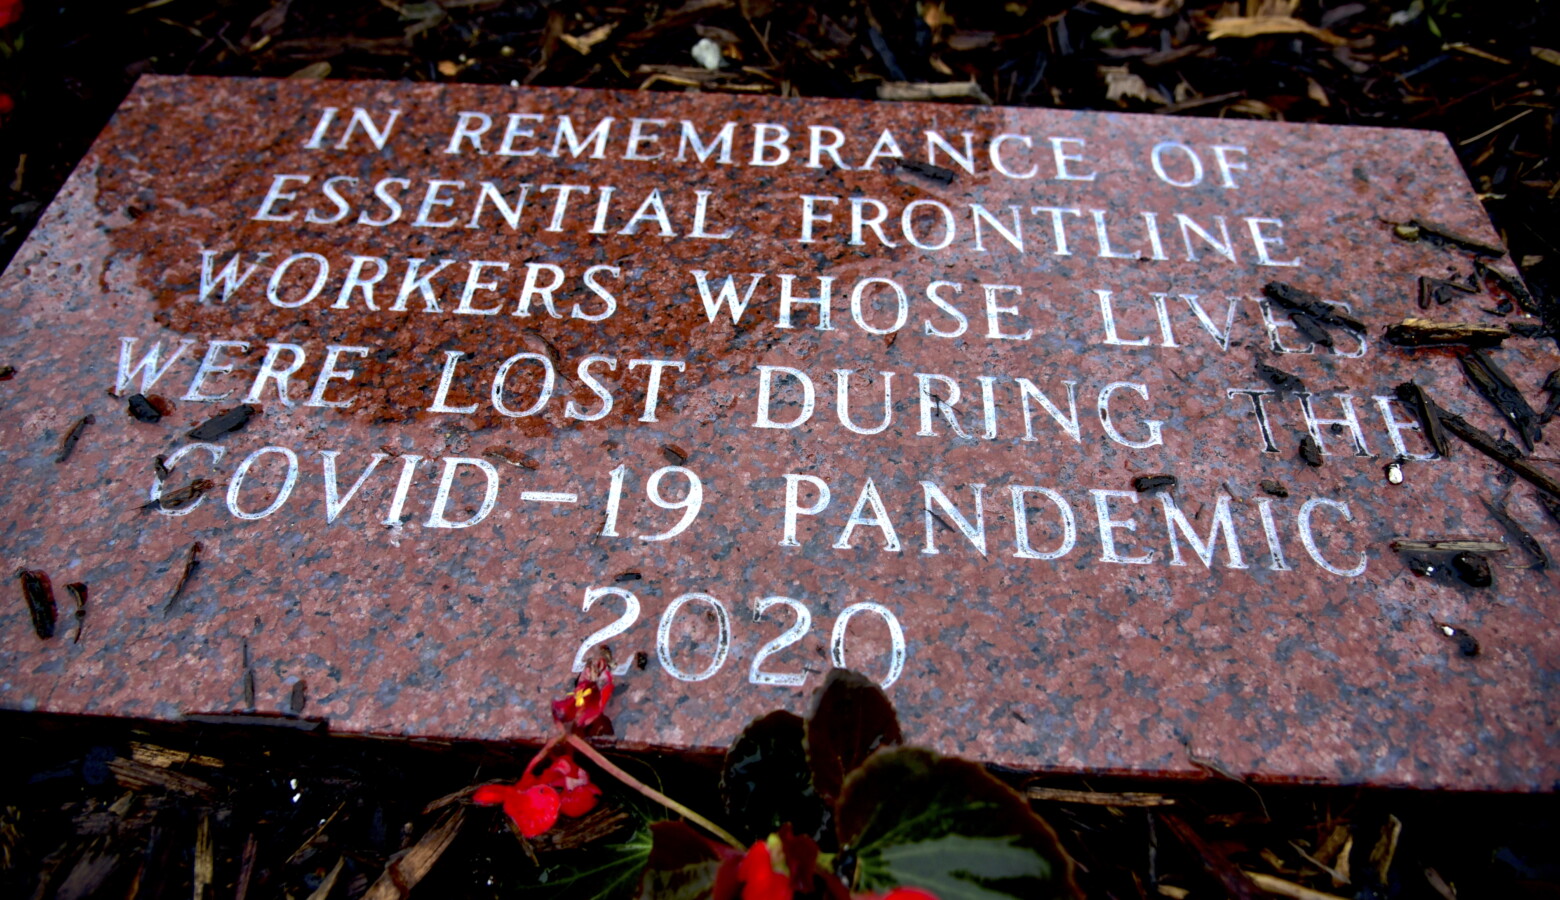 A memorial to essential workers who died in the pandemic was dedicated at Howard Park in South Bend. (Justin Hicks/IPB News)